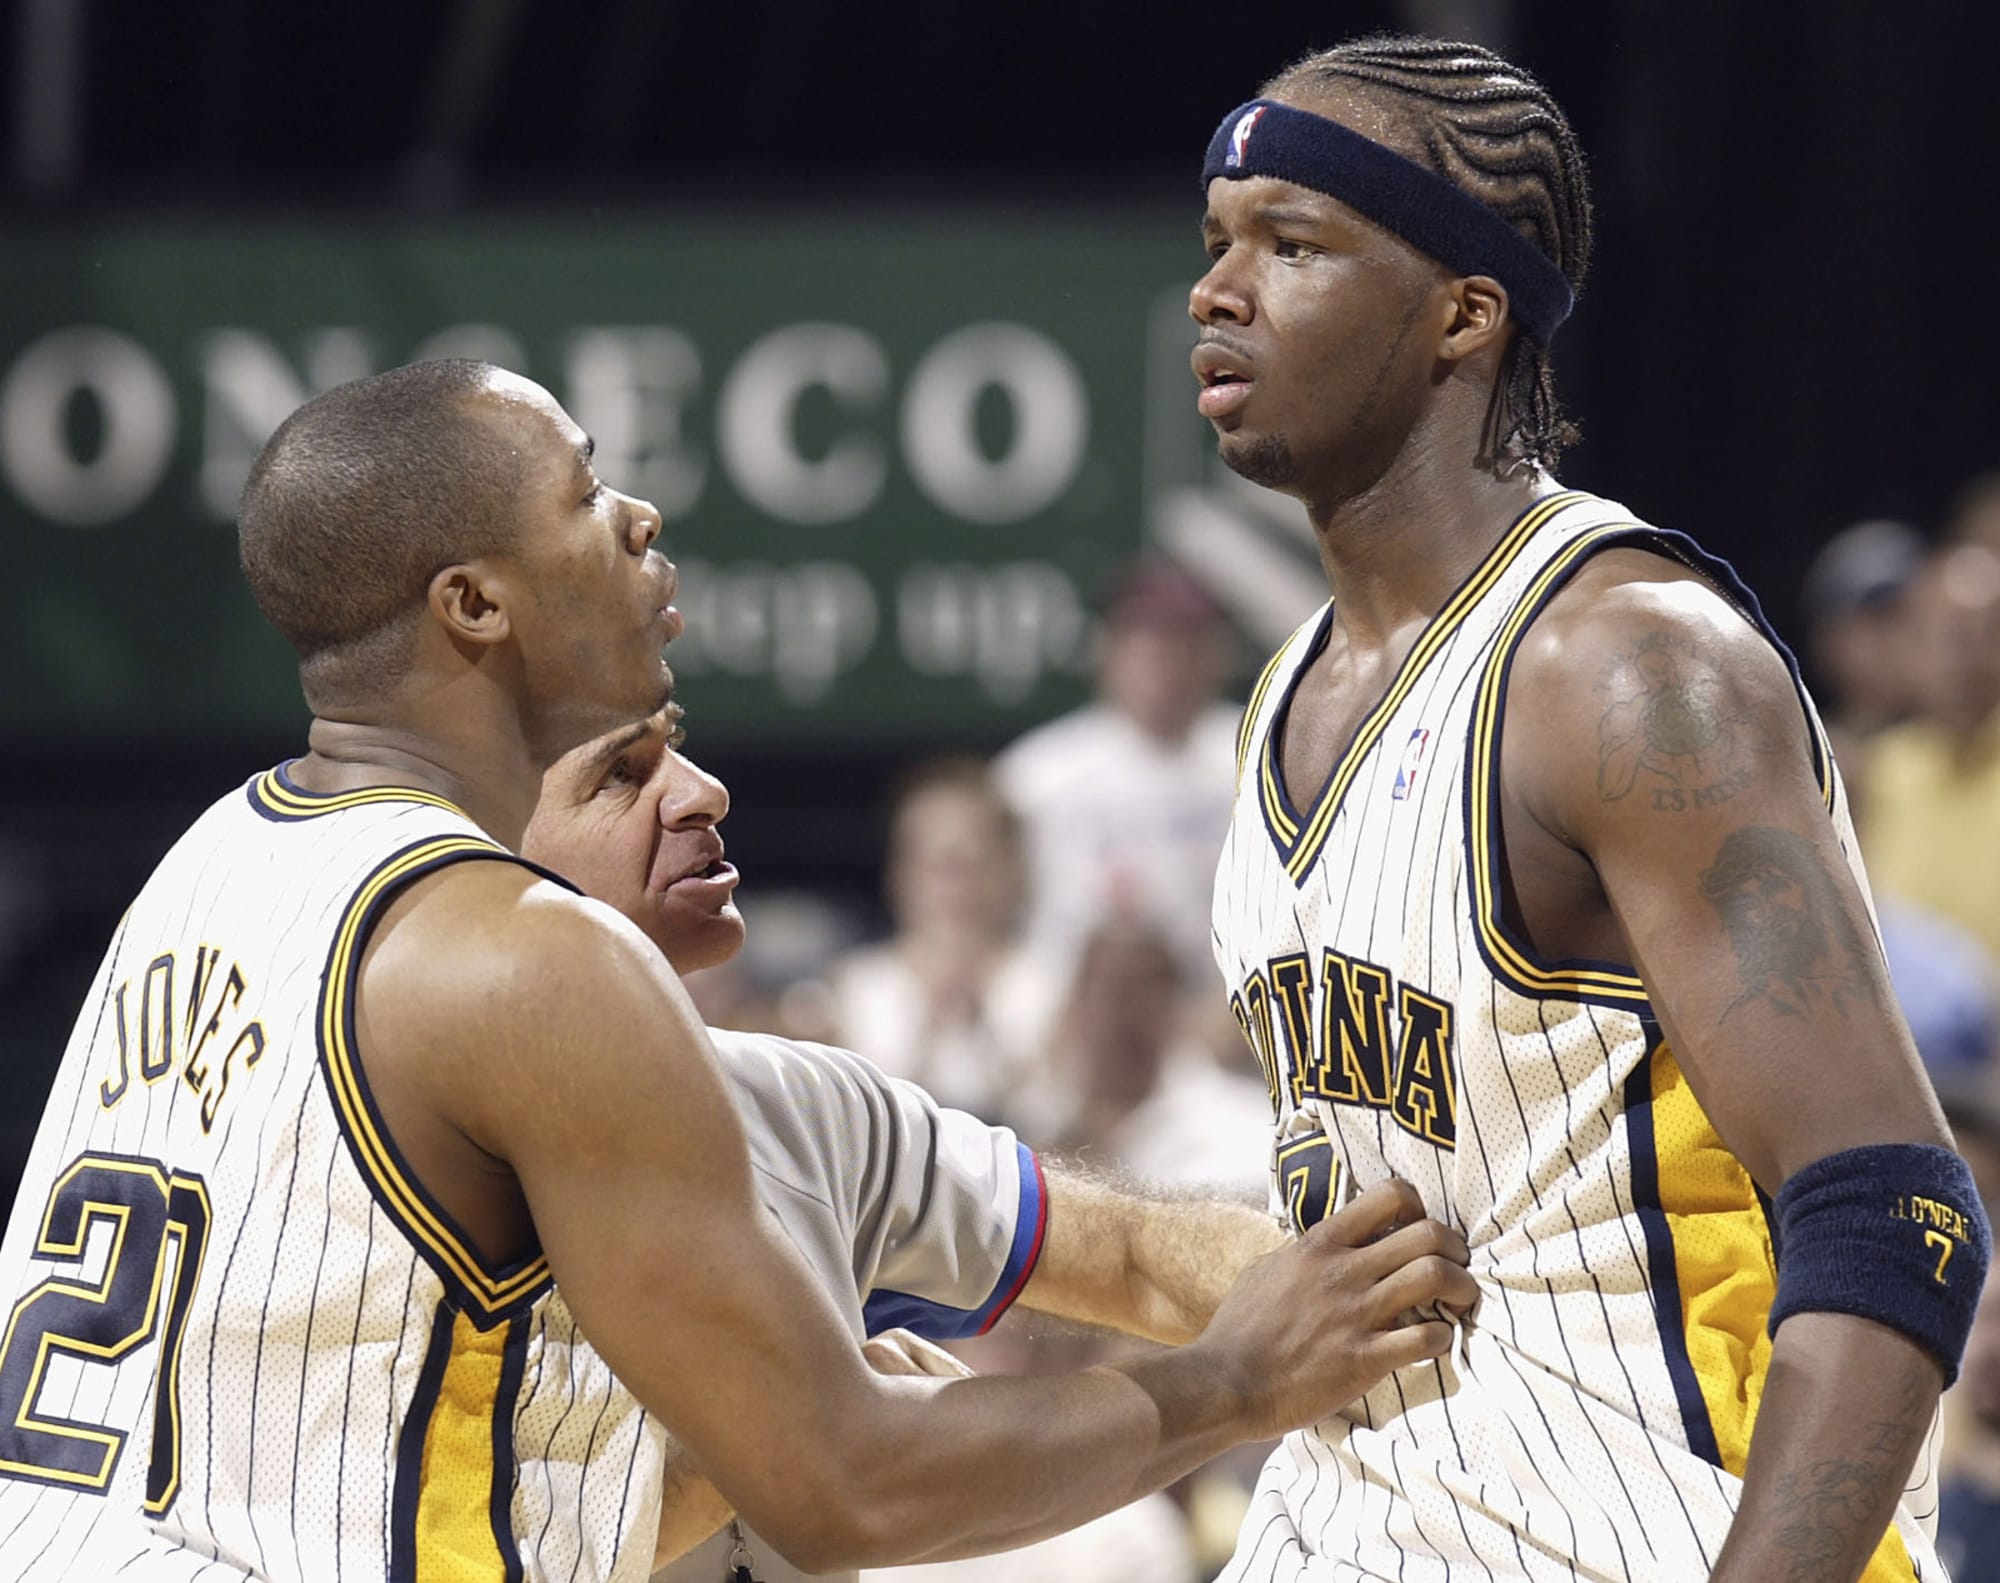 Jermaine O'Neal makes a new documentary that breaks down 'Malice at the  Palace